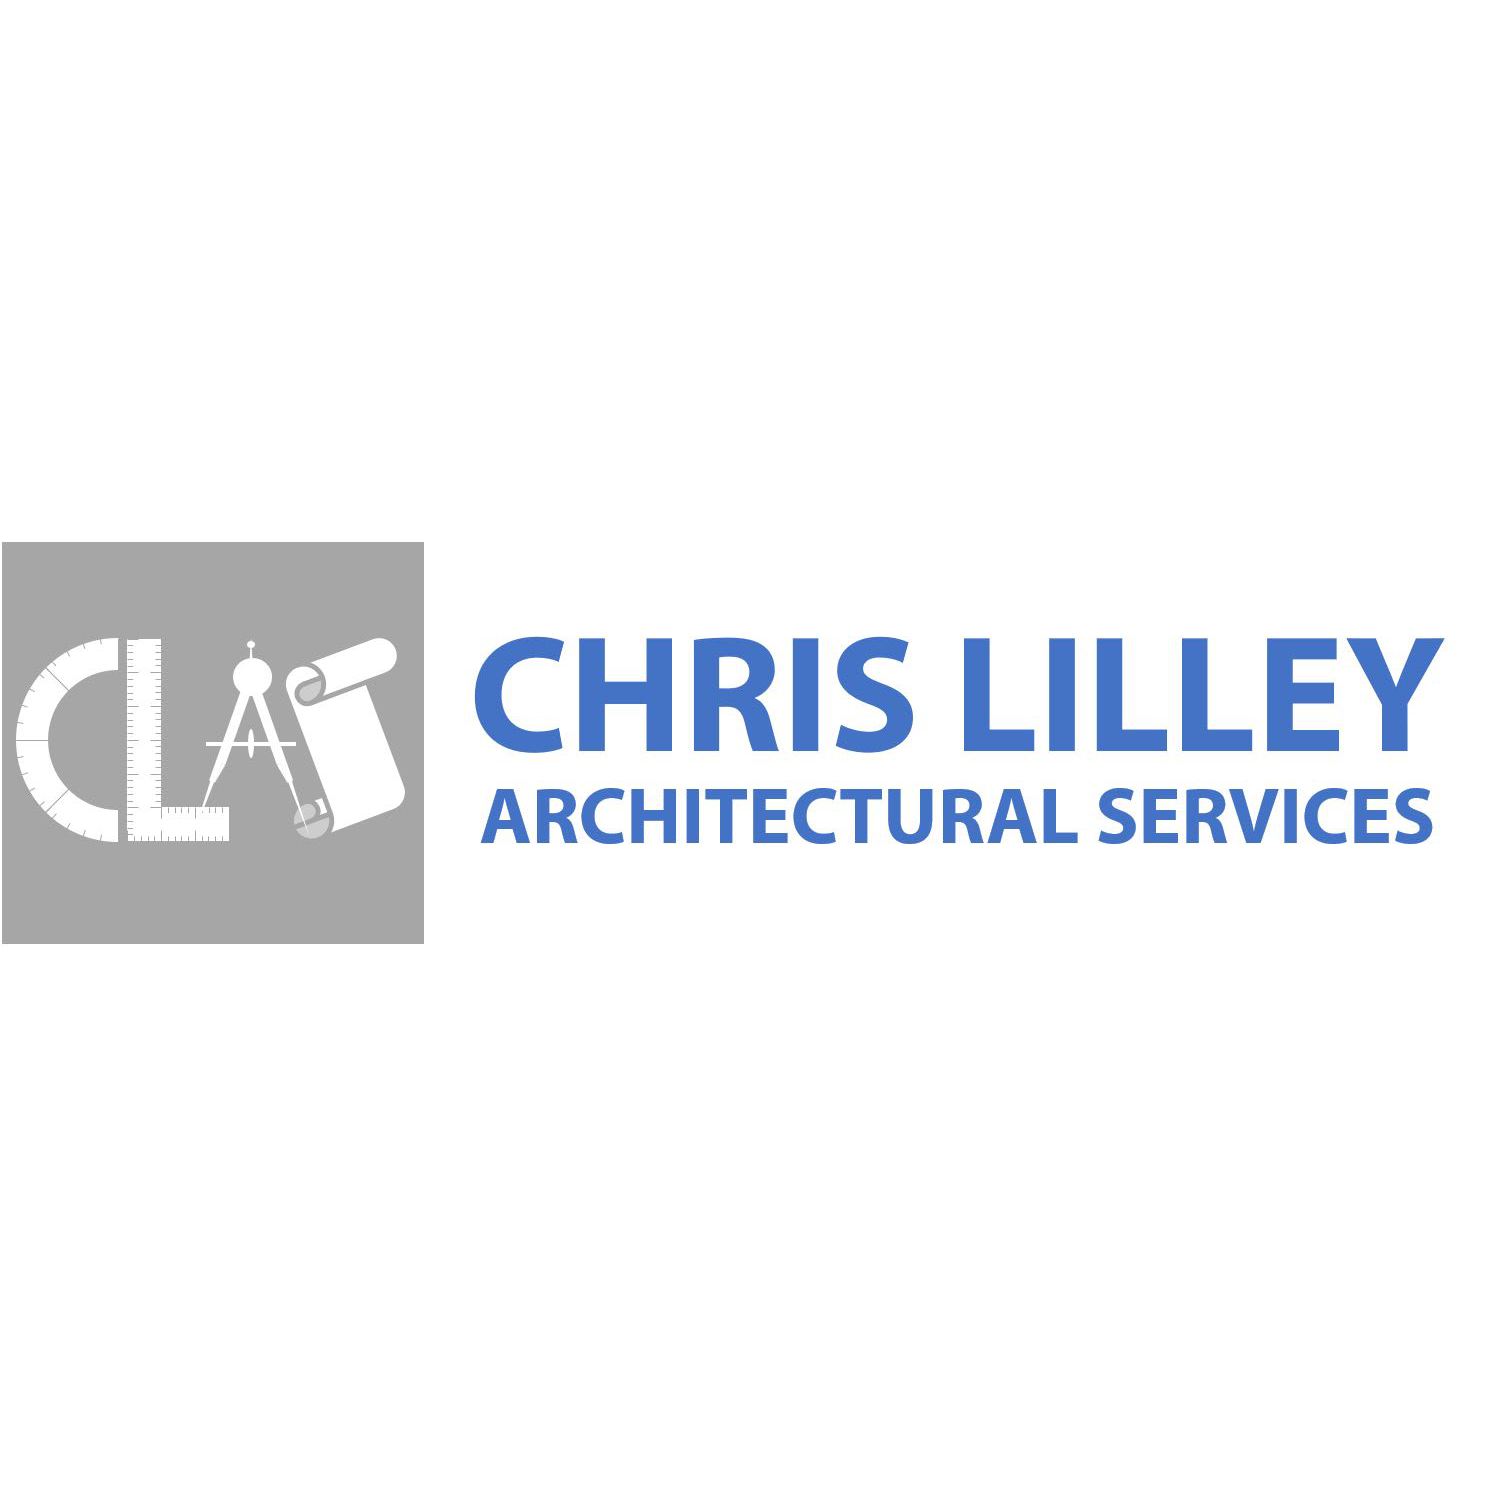 Chris Lilley Architectural Services Logo